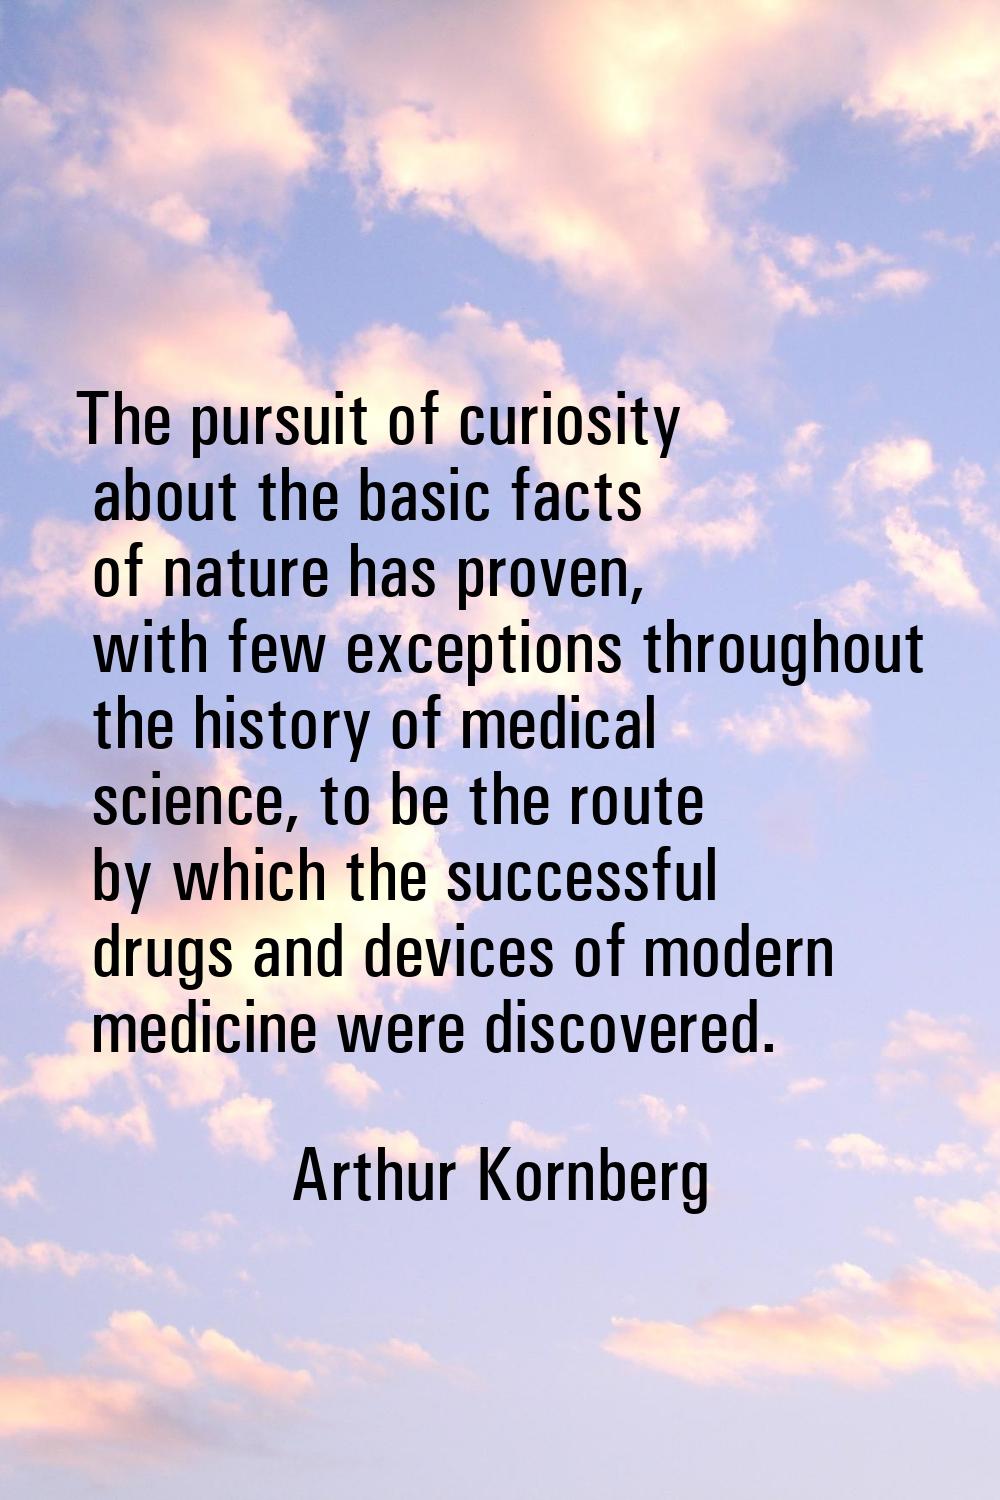 The pursuit of curiosity about the basic facts of nature has proven, with few exceptions throughout